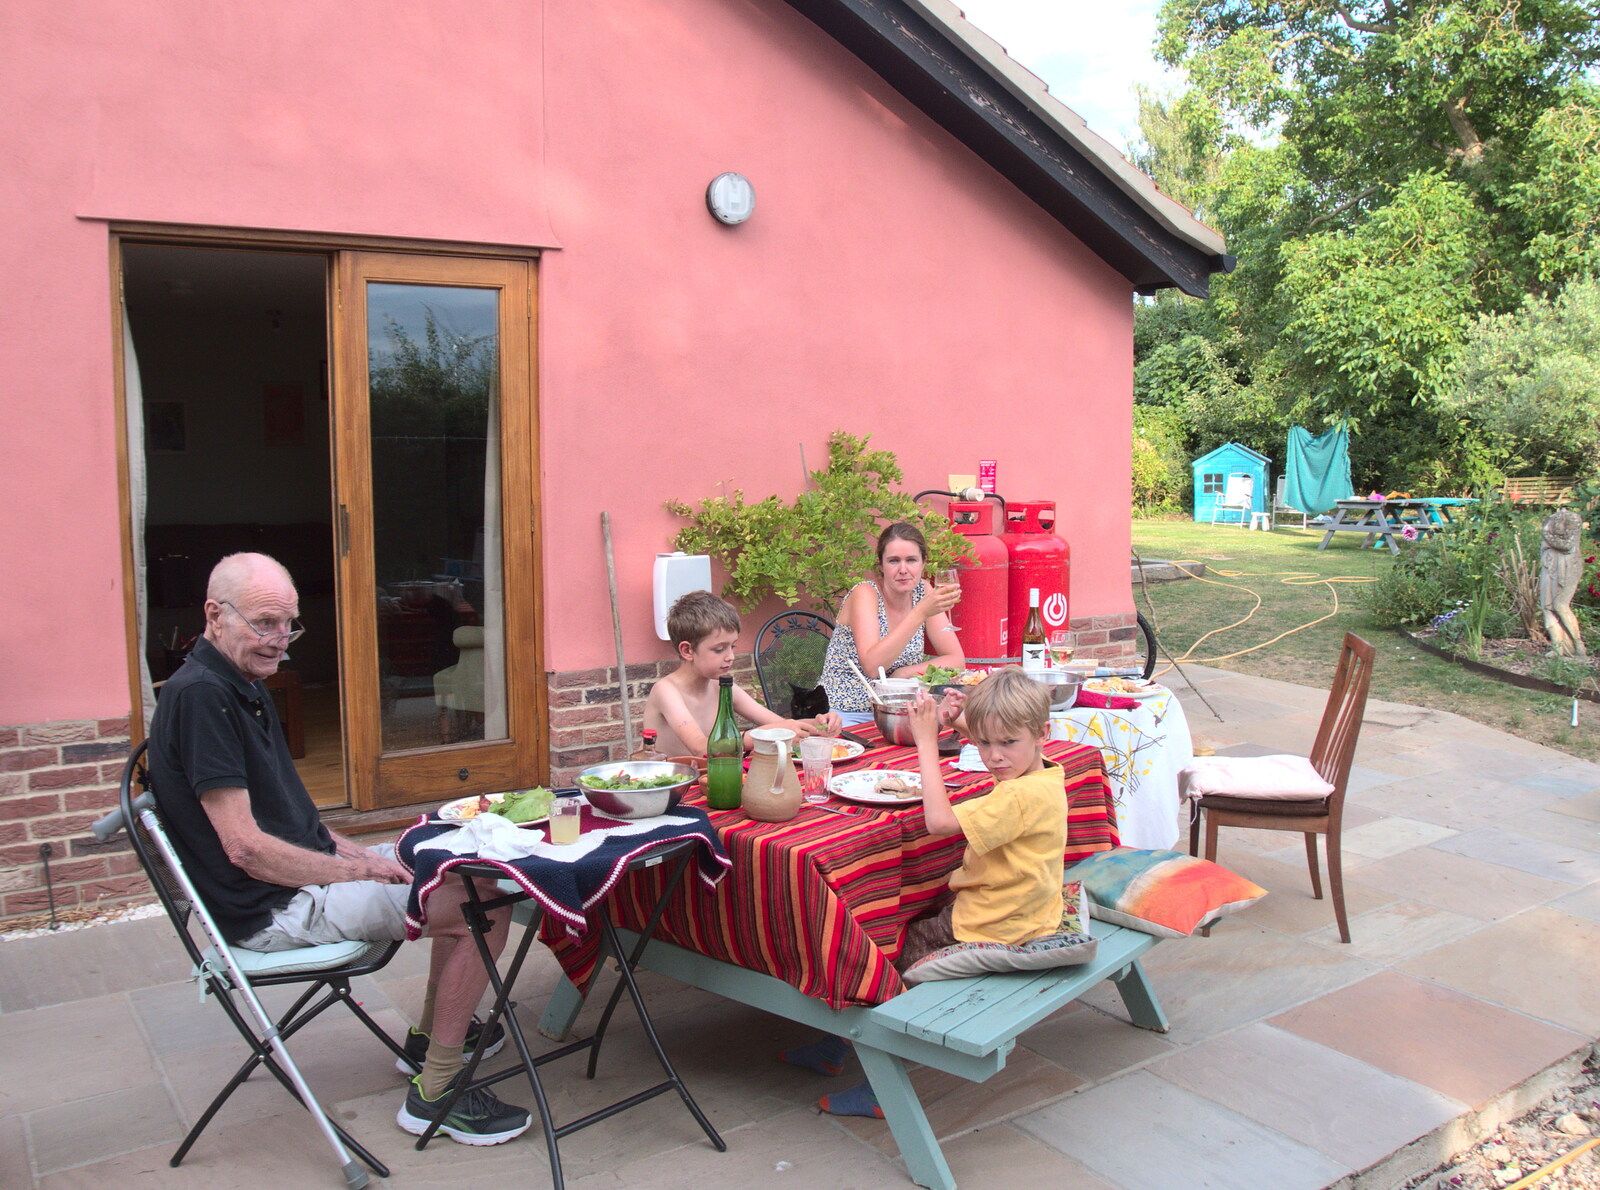 RAF 100 Flypast and Sing Tong, Diss, Norfolk - 7th July 2018: Grandad's over for tea on the patio